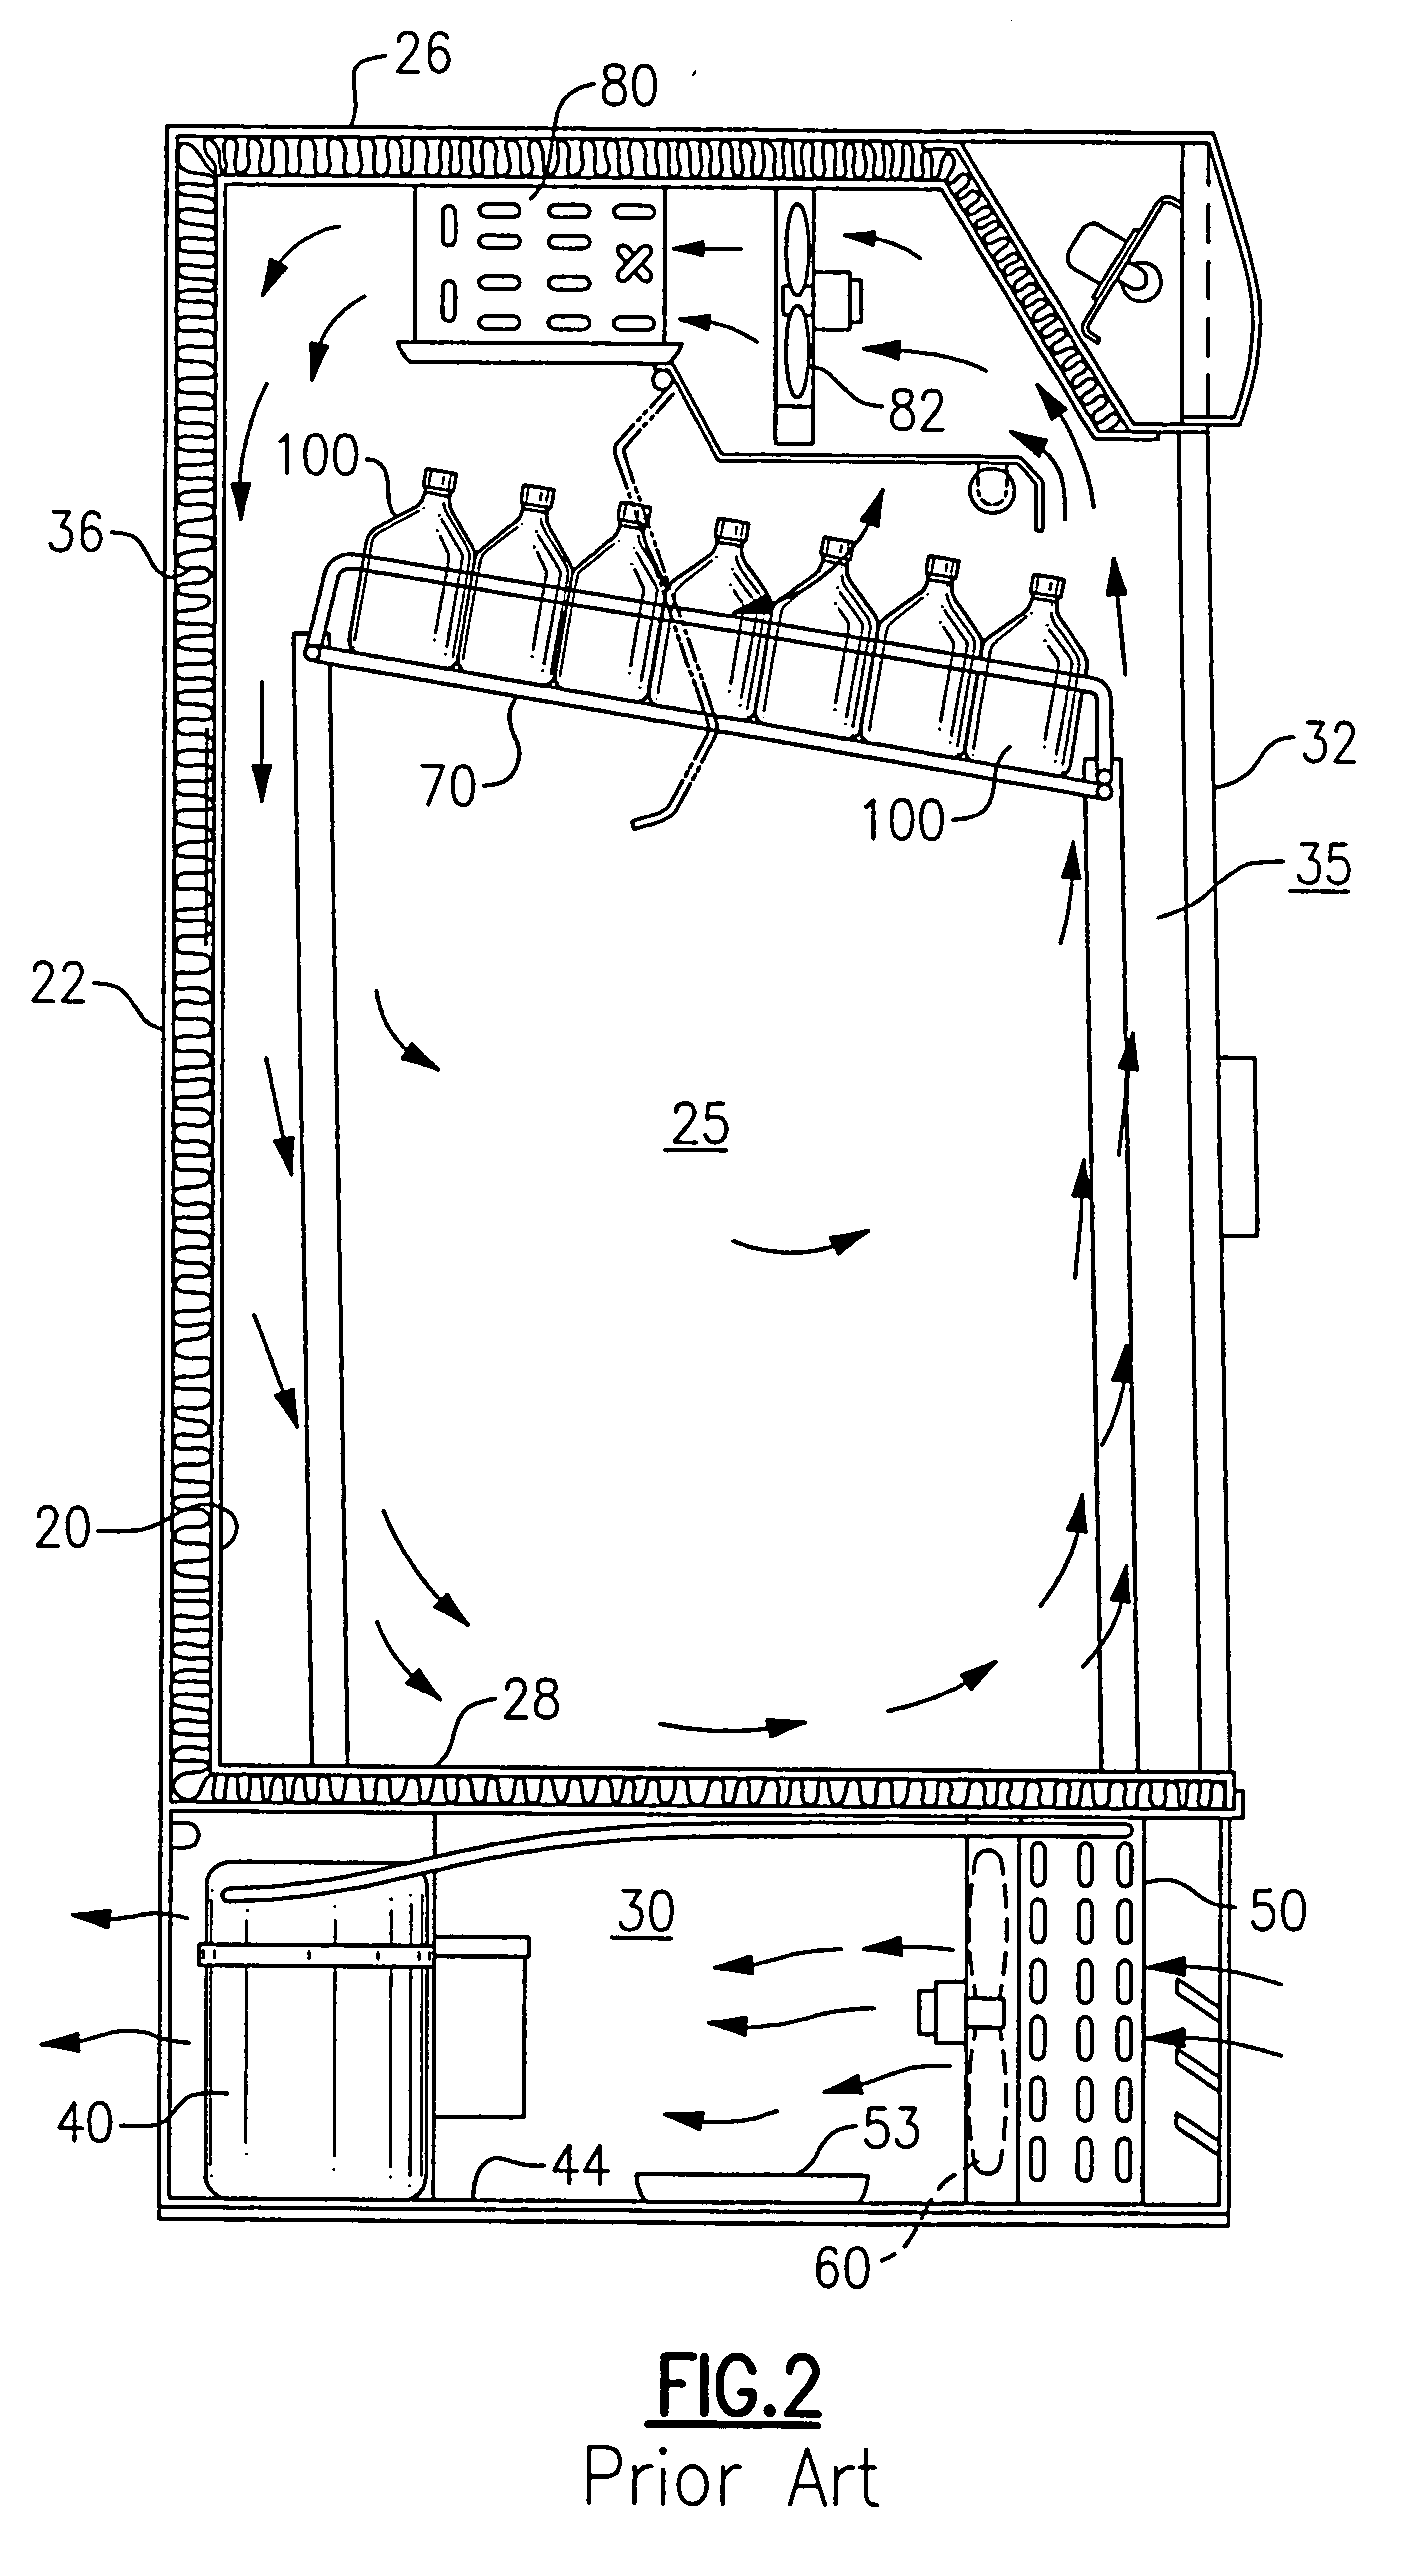 Foul-resistant condenser using microchannel tubing